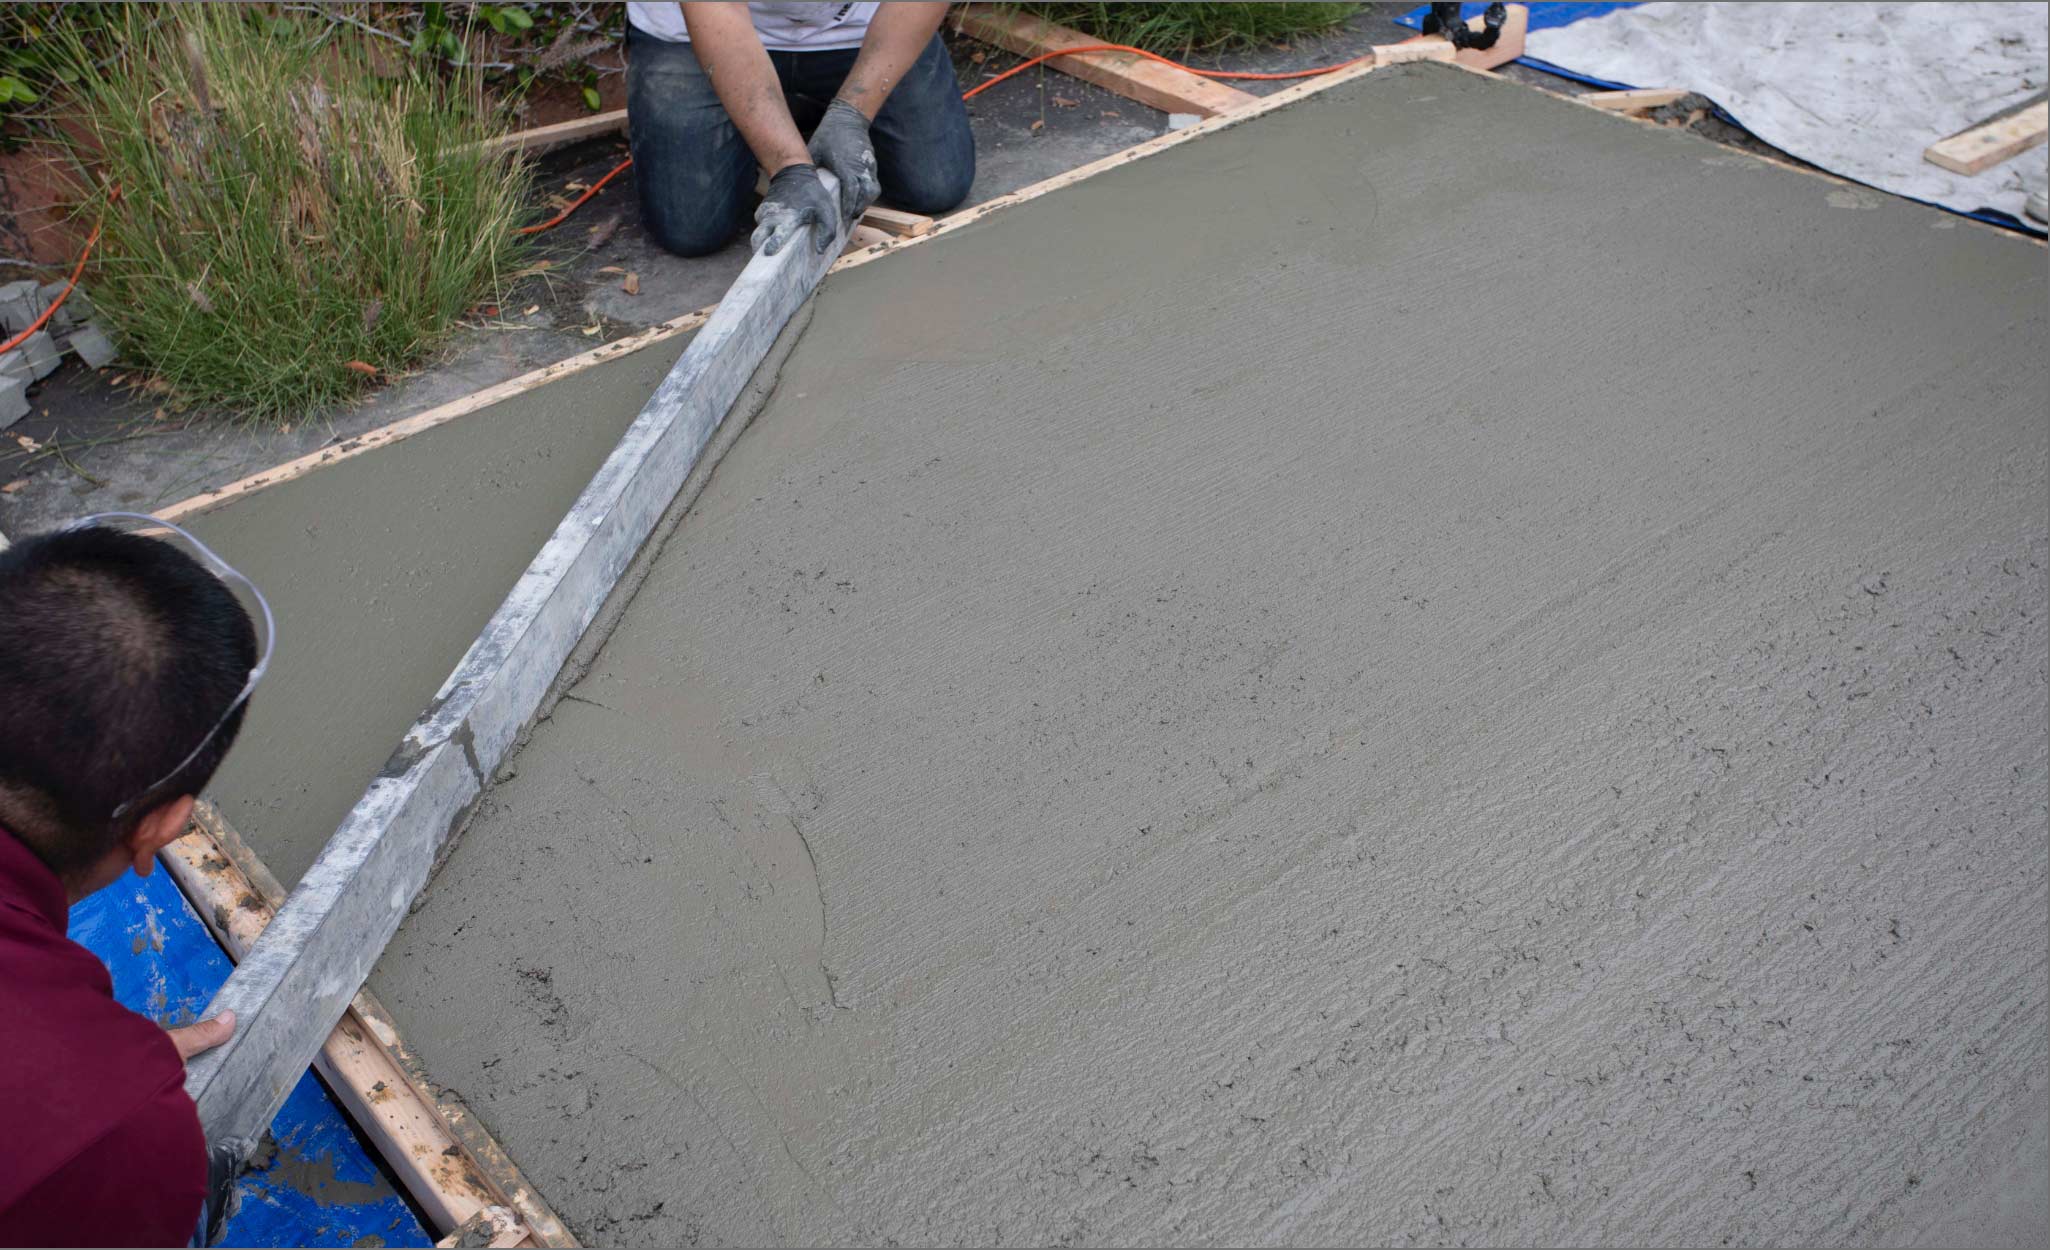 How To Finish A Concrete Slab How to Lay Concrete - The Home Depot